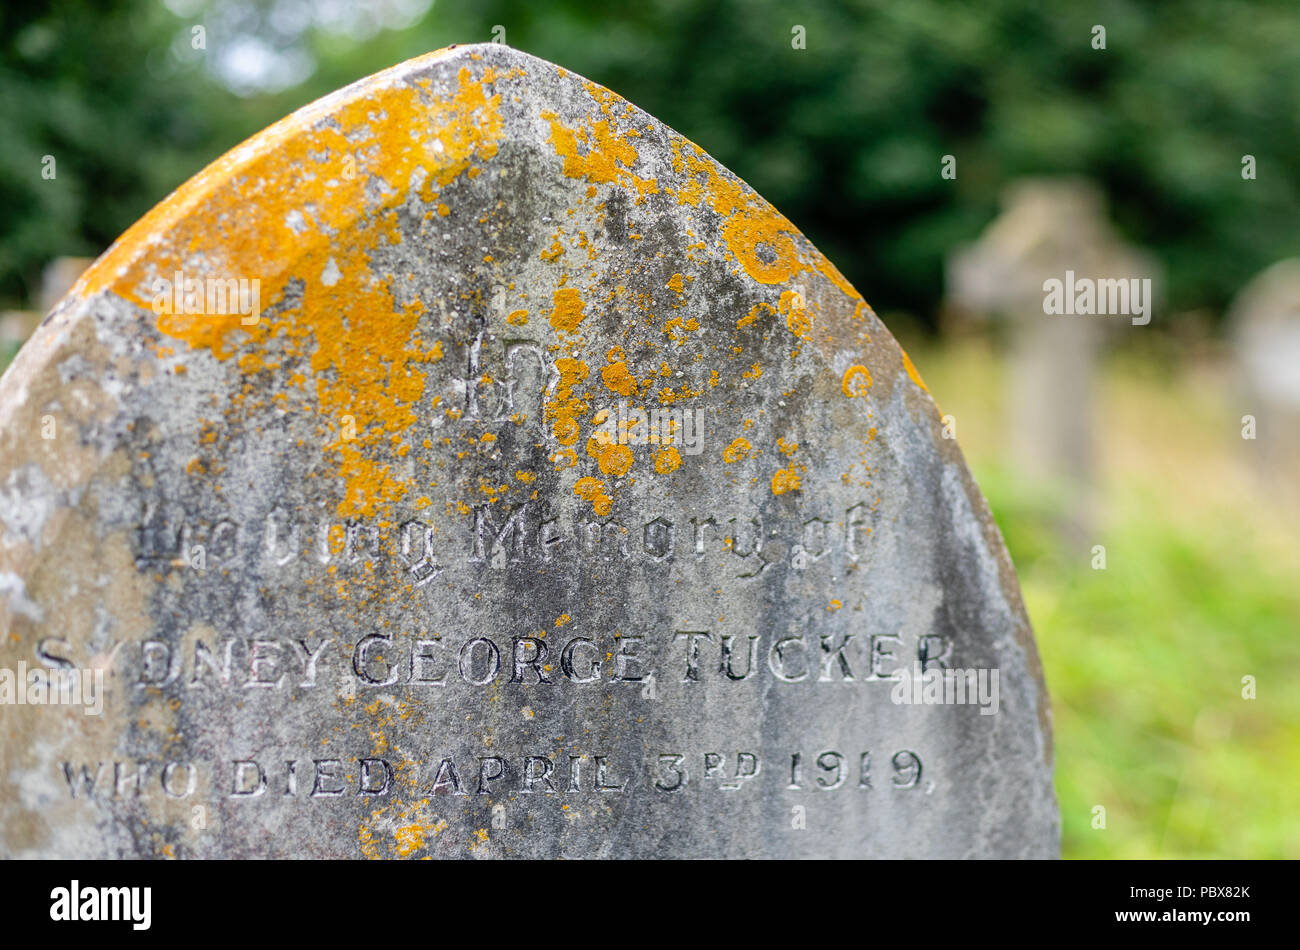 Lichen (Caloplaca flavescens) growth on an old early 20th century gravestone in Southern England, UK Stock Photo